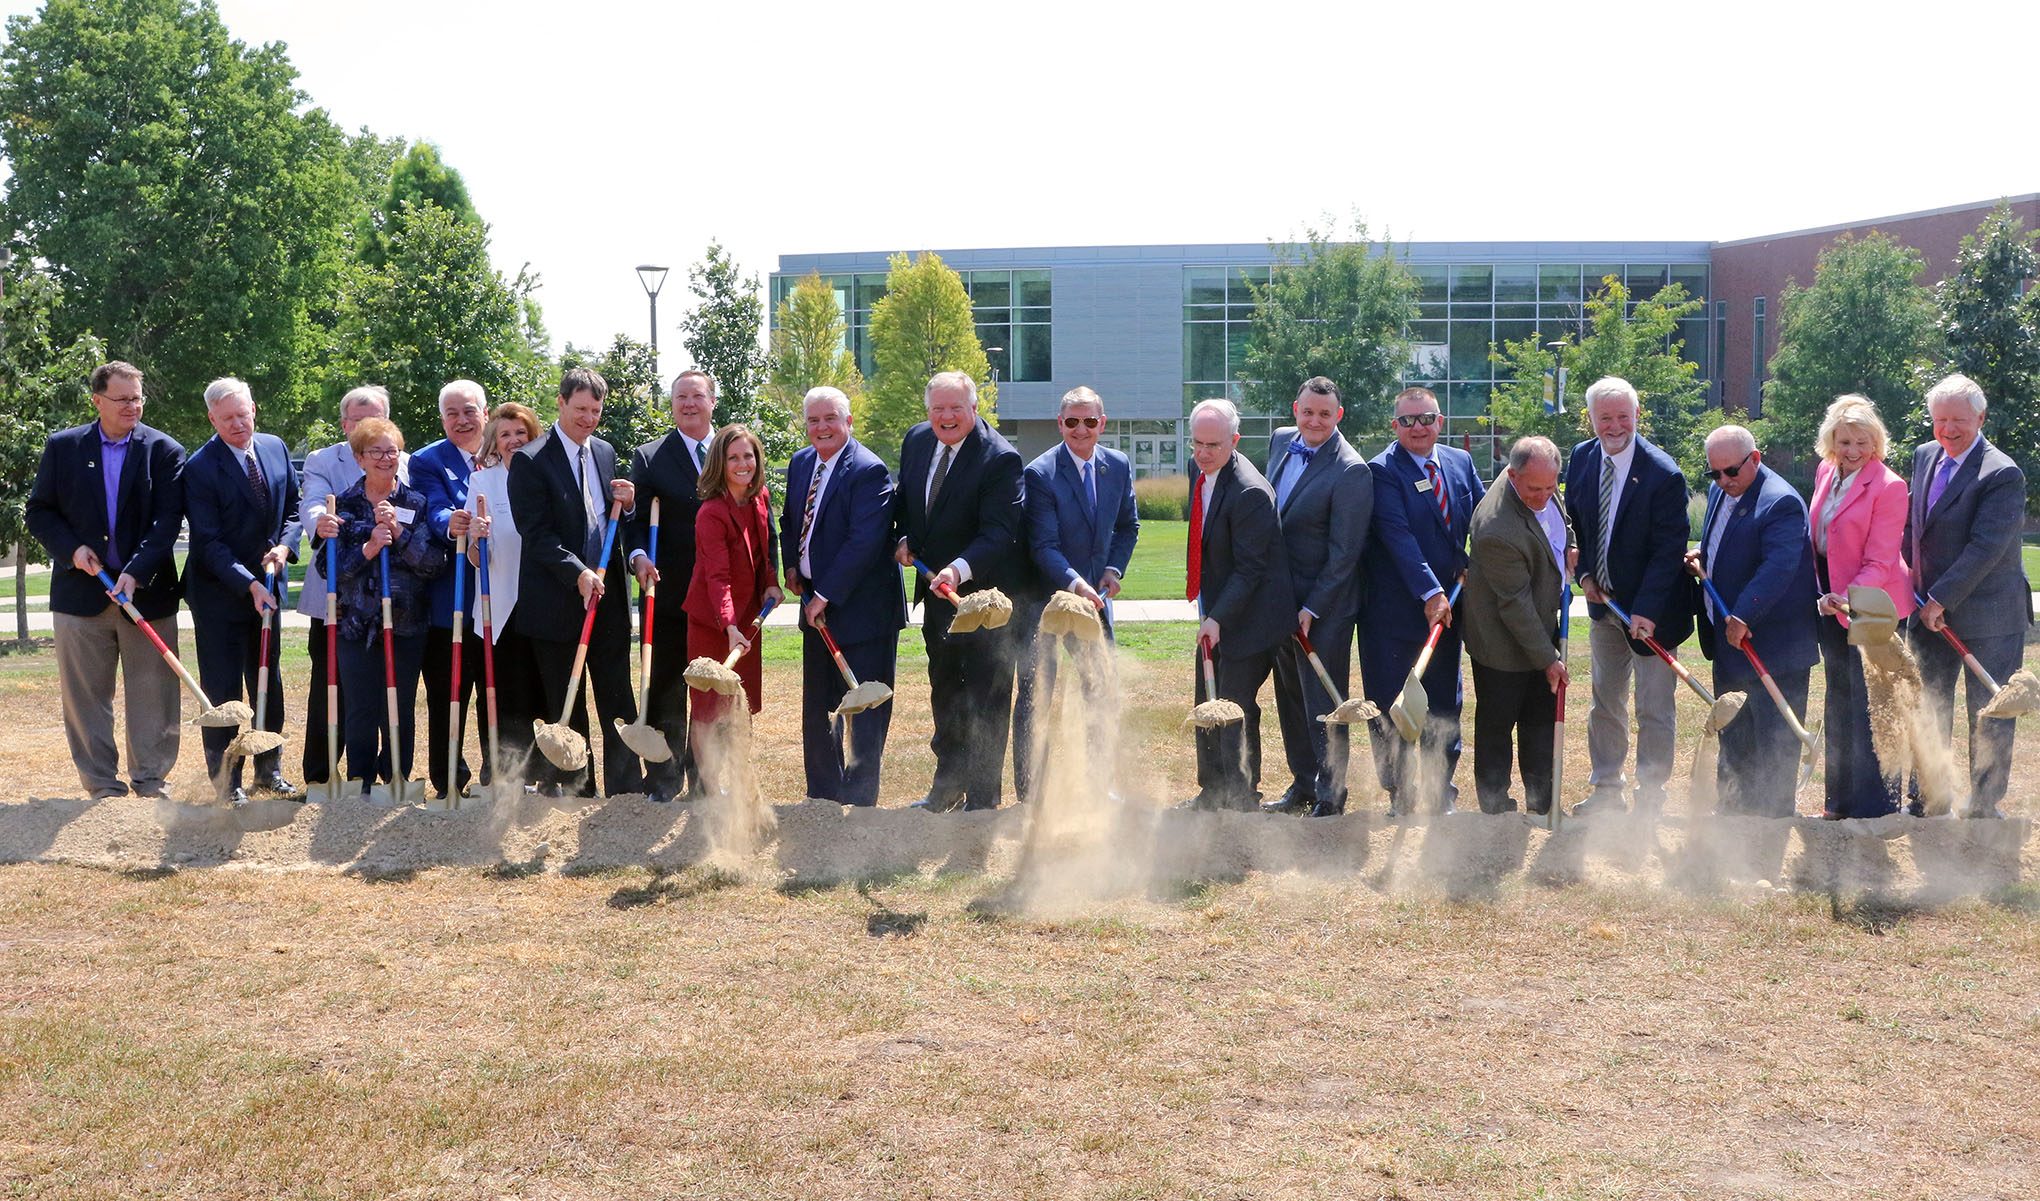 A team of 20 shovelers broke ground Tuesday on the UNK-UNMC Rural Health Education Building&period;